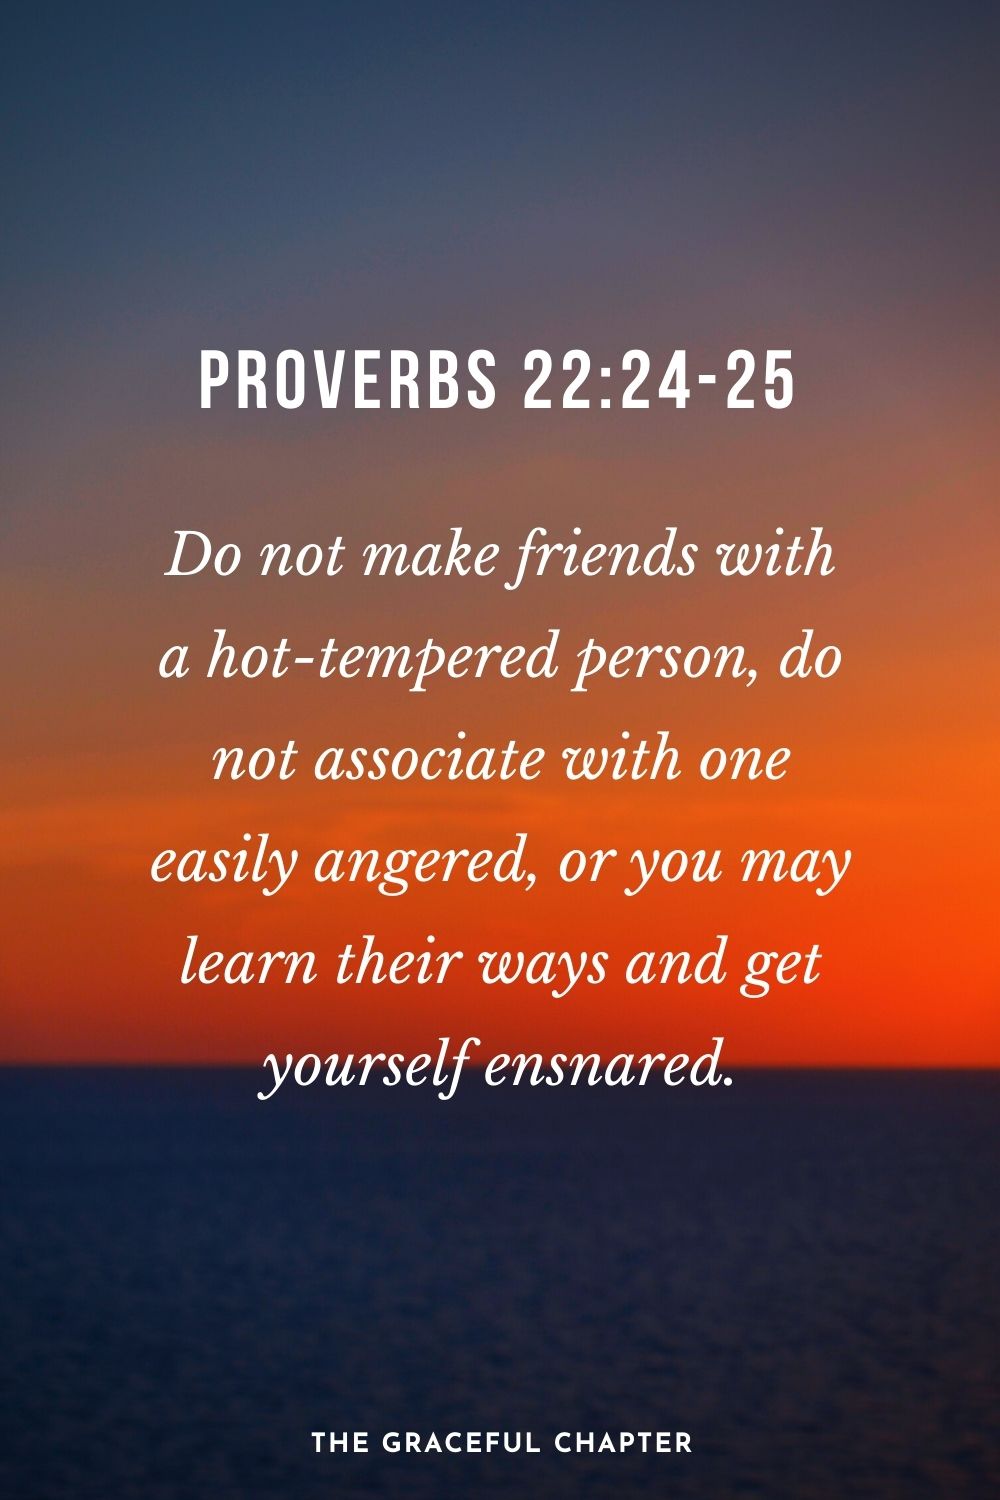 Do not make friends with a hot-tempered person, do not associate with one easily angered, or you may learn their ways and get yourself ensnared. Proverbs 22:24-25